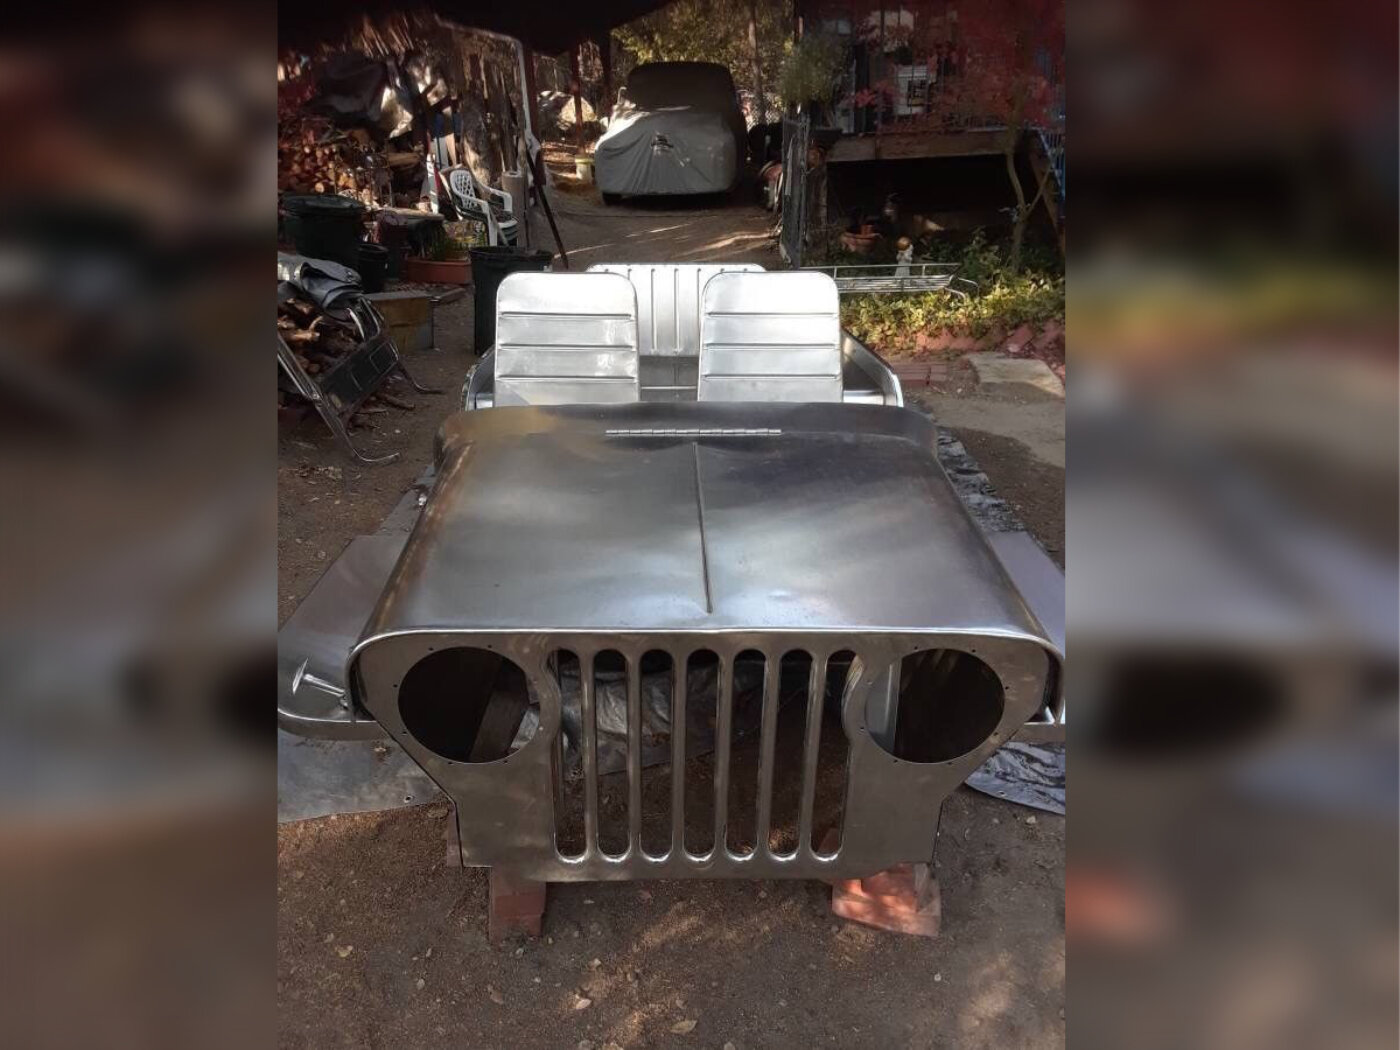 						Stainless Jeep 1
			